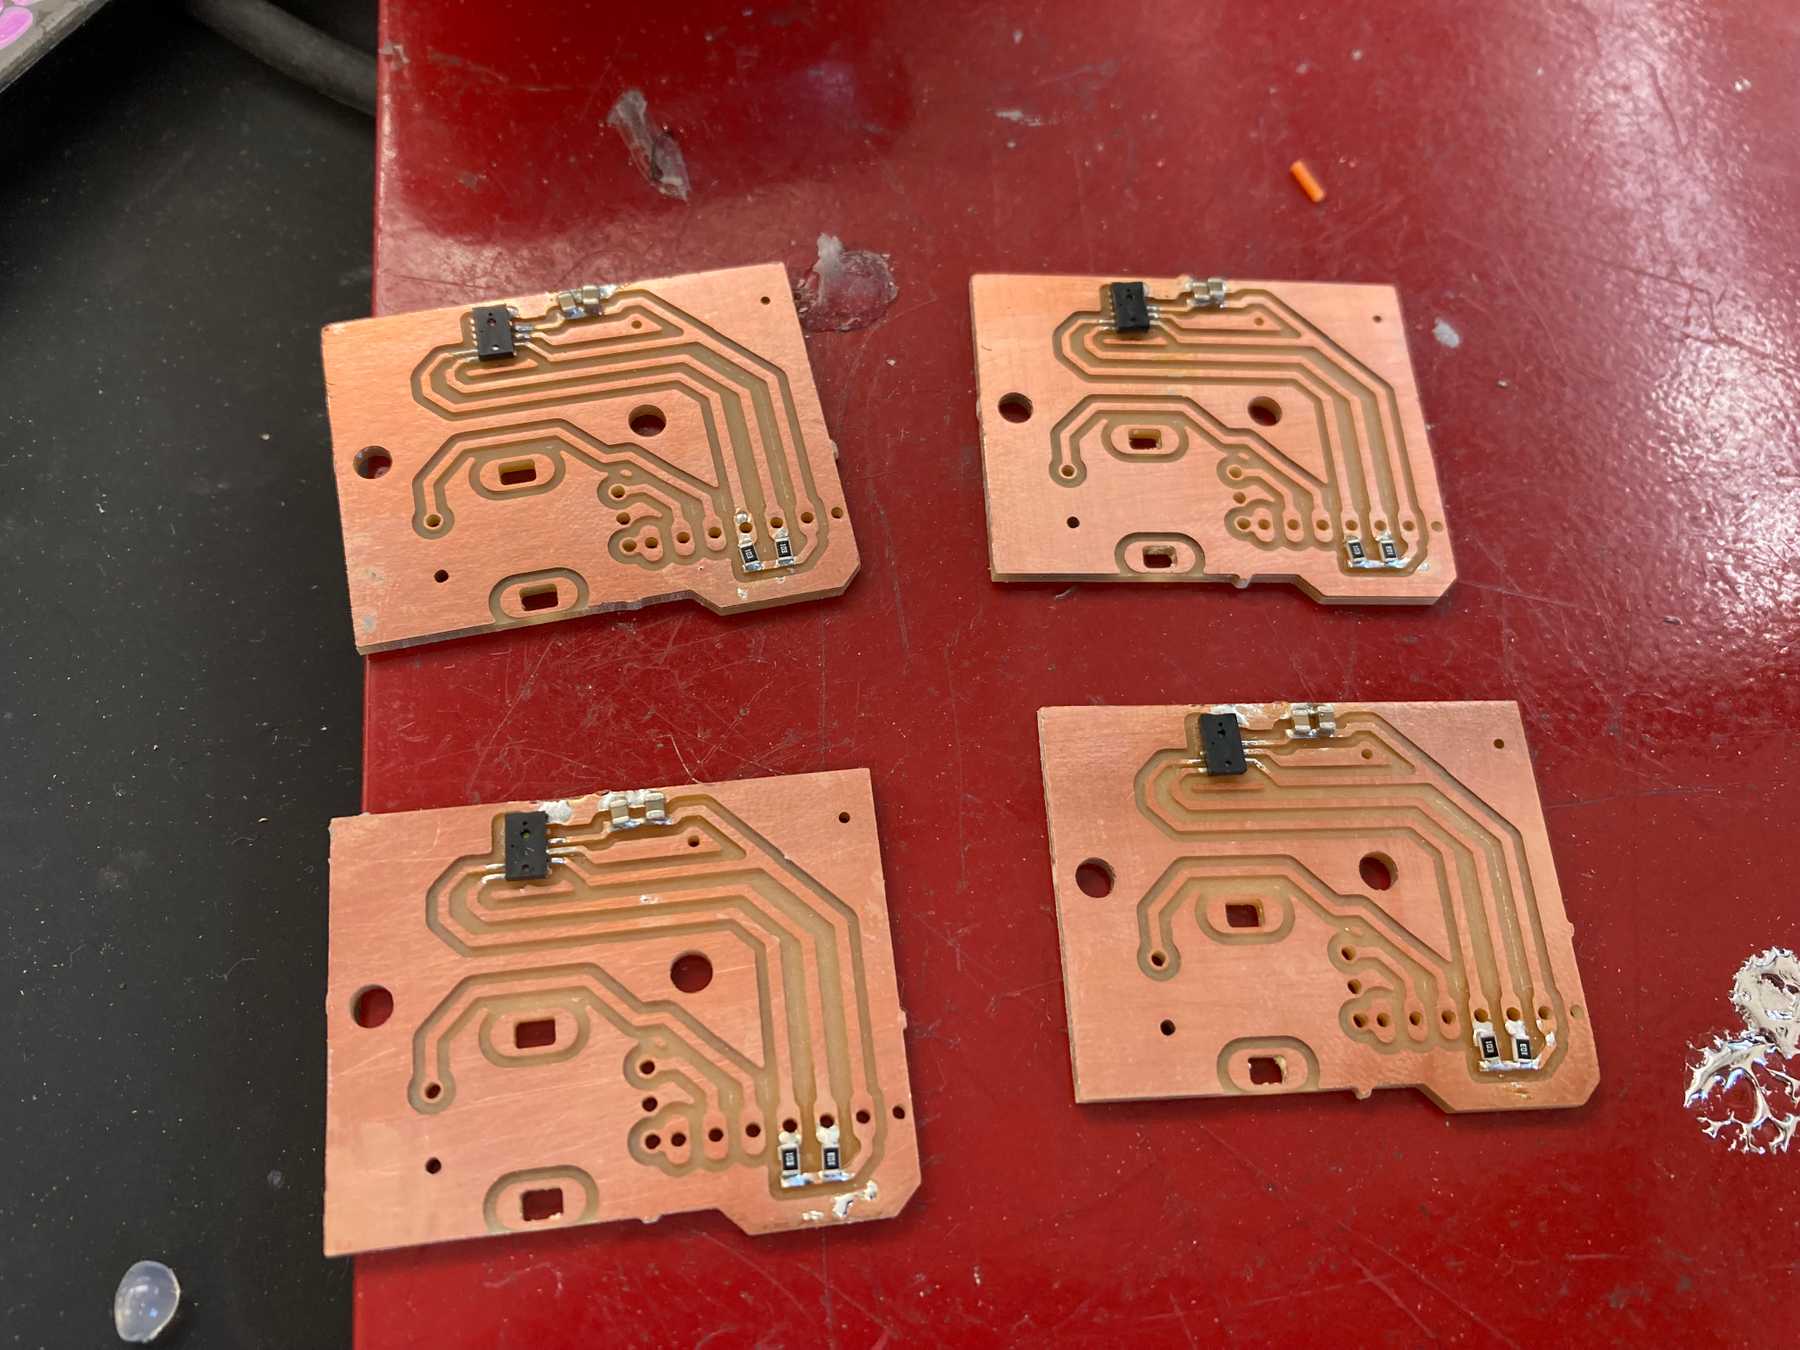 The soldered components